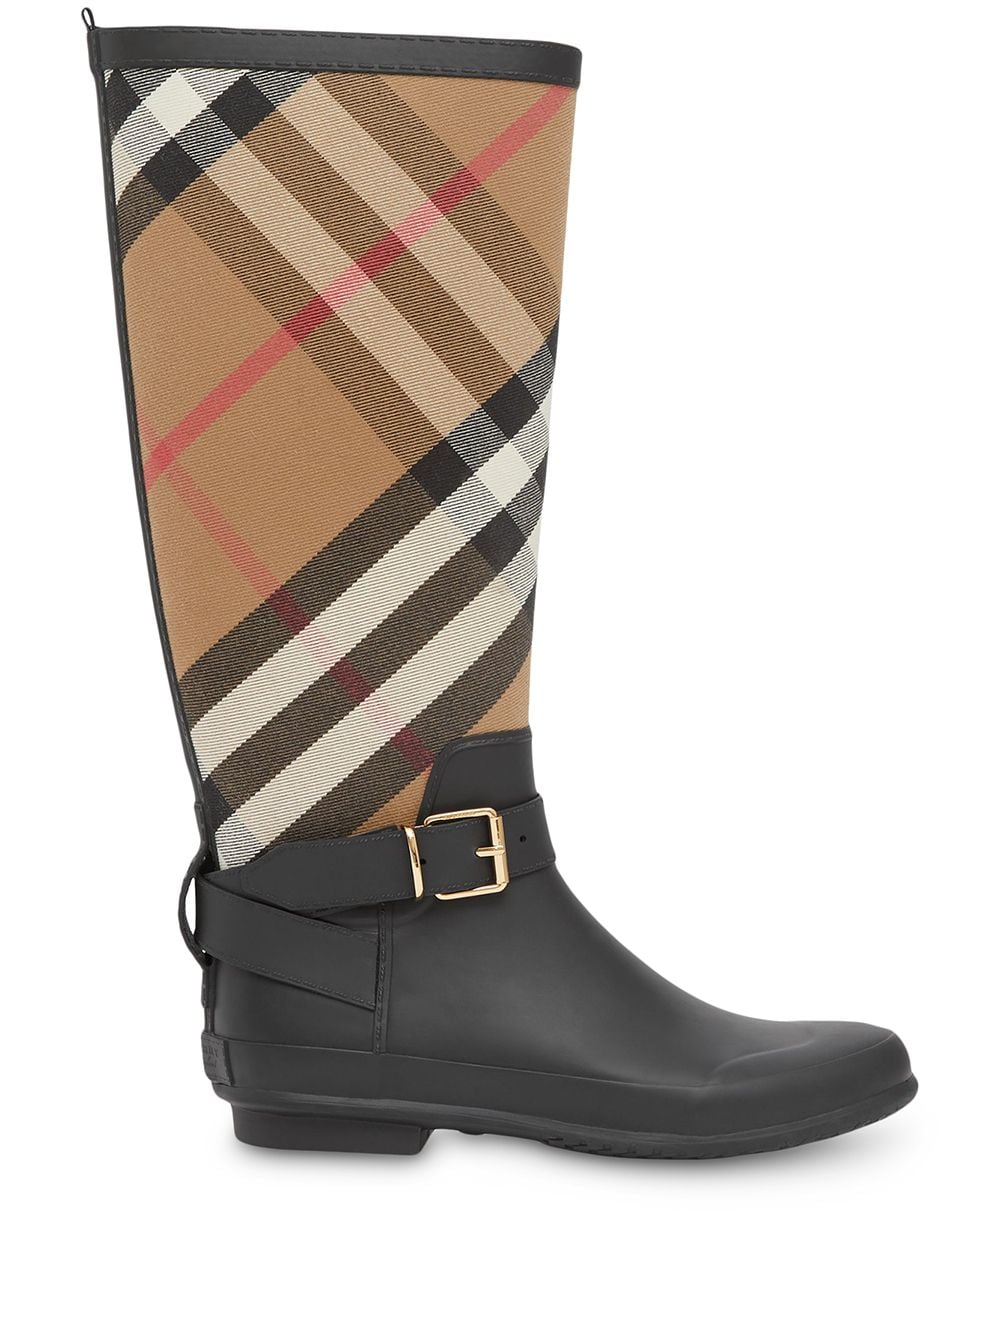 Burberry House Check rubber rain boots